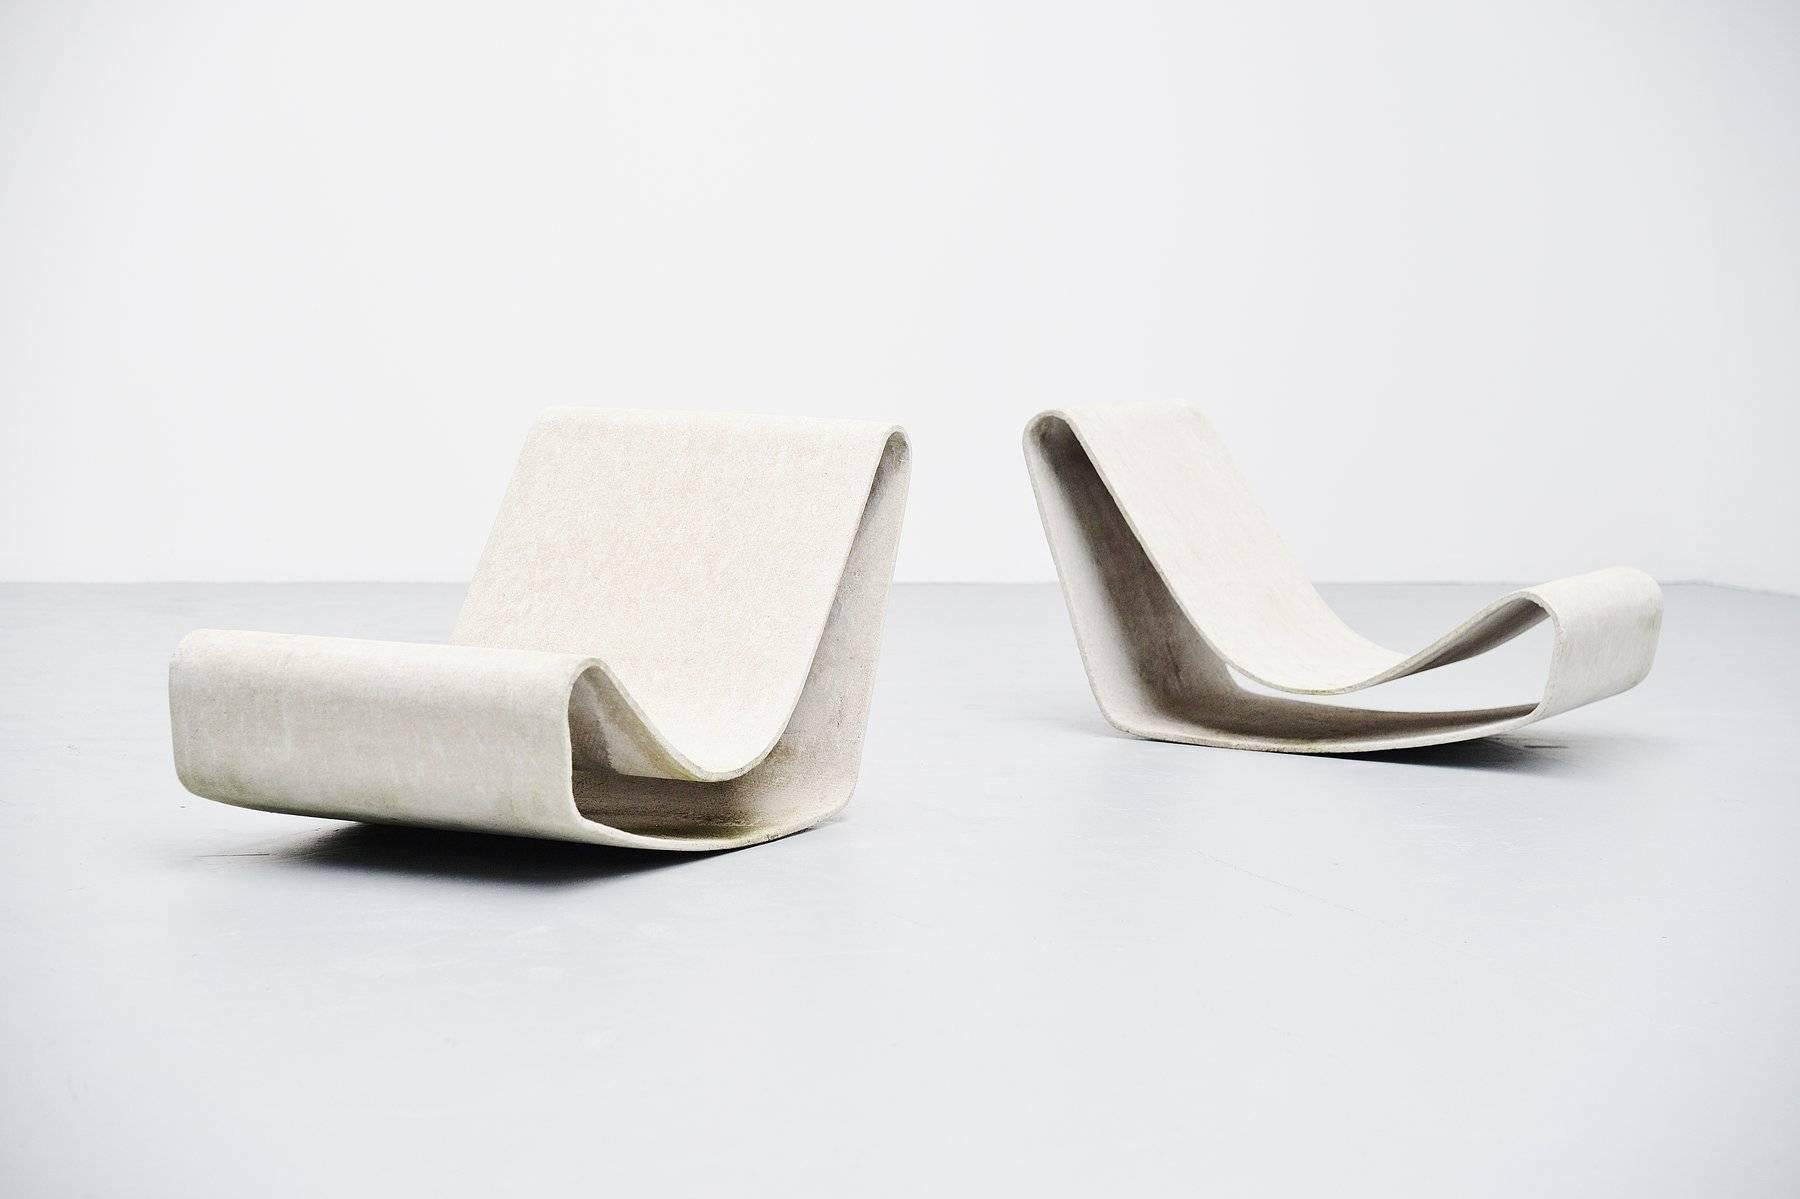 Very nice pair of low lounge chairs designed by Willy Guhl for Eternit, Switzerland 1954. These iconic garden chairs designed by Willy Guhl are made of cellulose infused fiber cement like concrete, which is nearly indestructible. These chairs are in